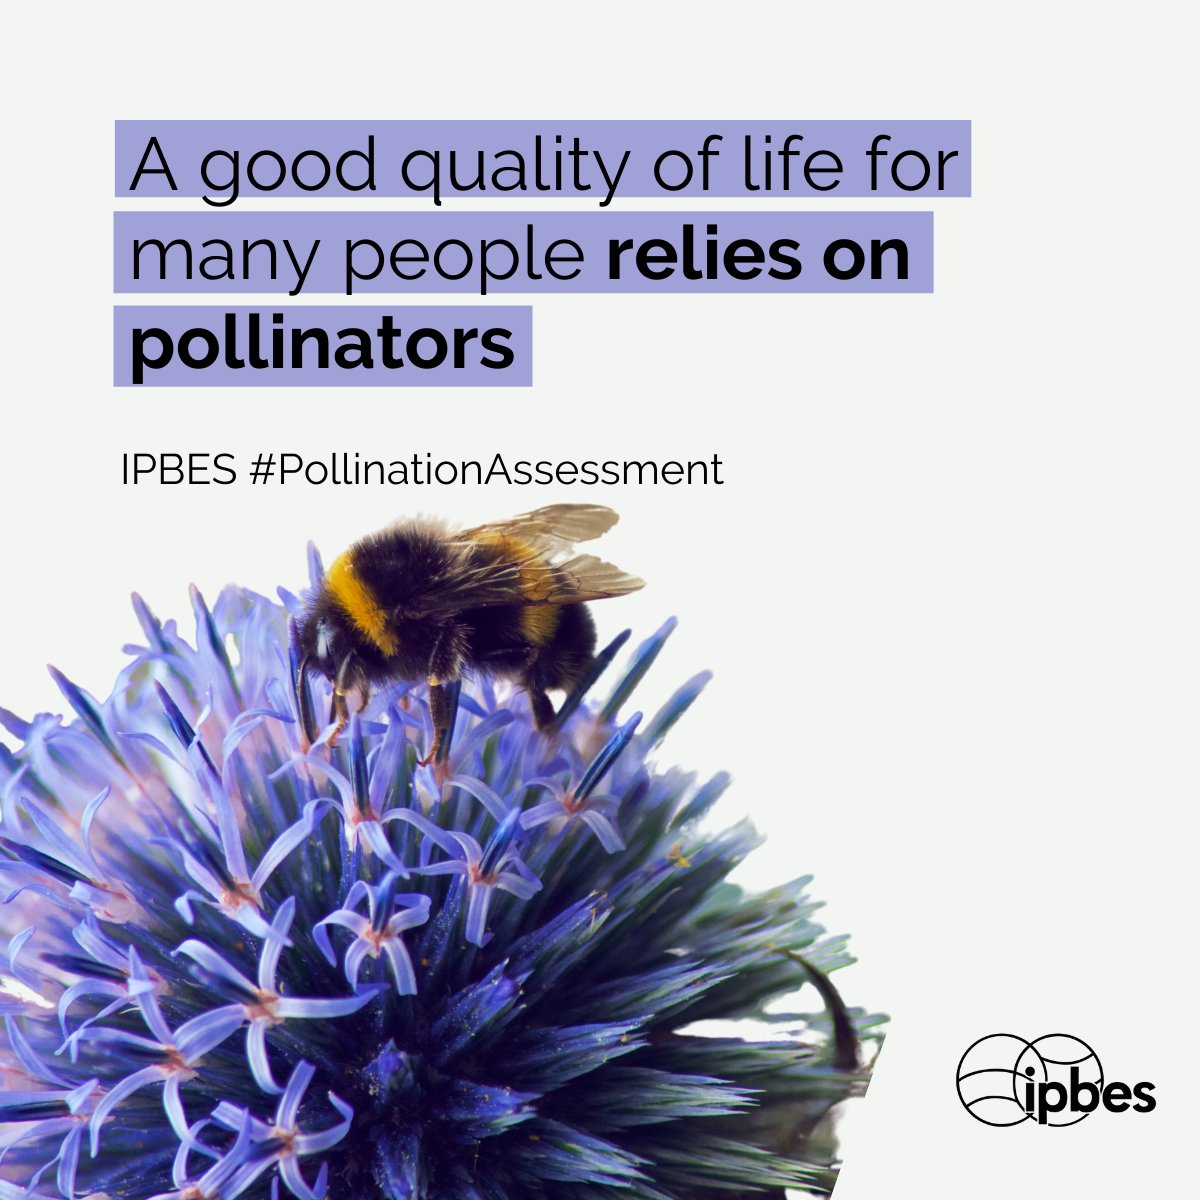 We depend on bees & other #pollinators for our quality of life

🐝🦋🦇🐦

They play a vital role in maintaining our food security, contribute to biodiversity & support other ecosystem services and much more!

#WorldBeeDay

Learn more w/ @IPBES #PollinationAssessment